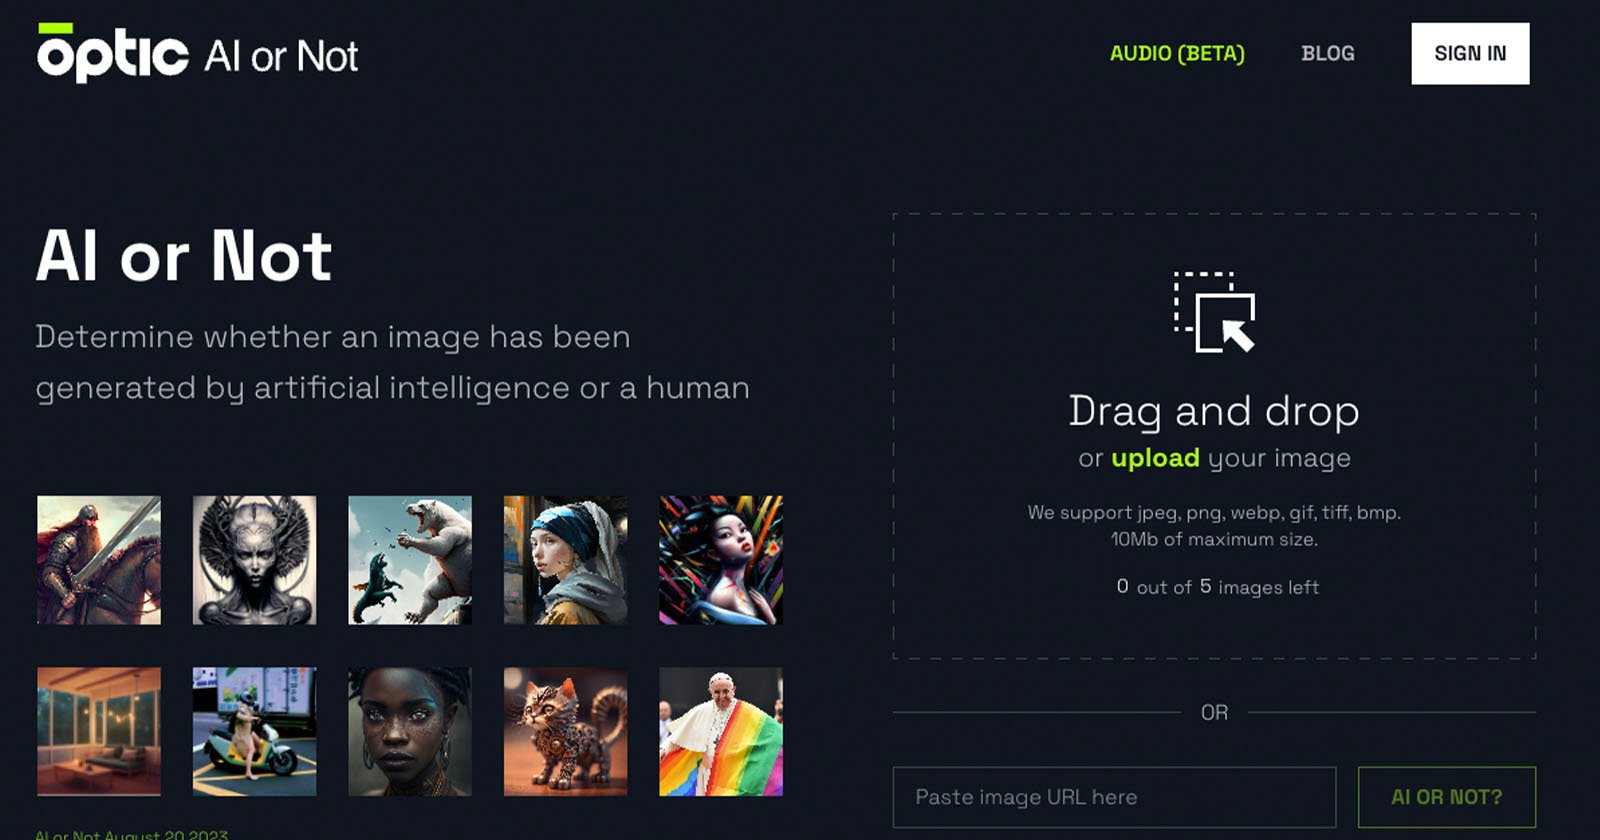 App That Claims to Identify AI Images Embroiled in Israel Hamas Argument